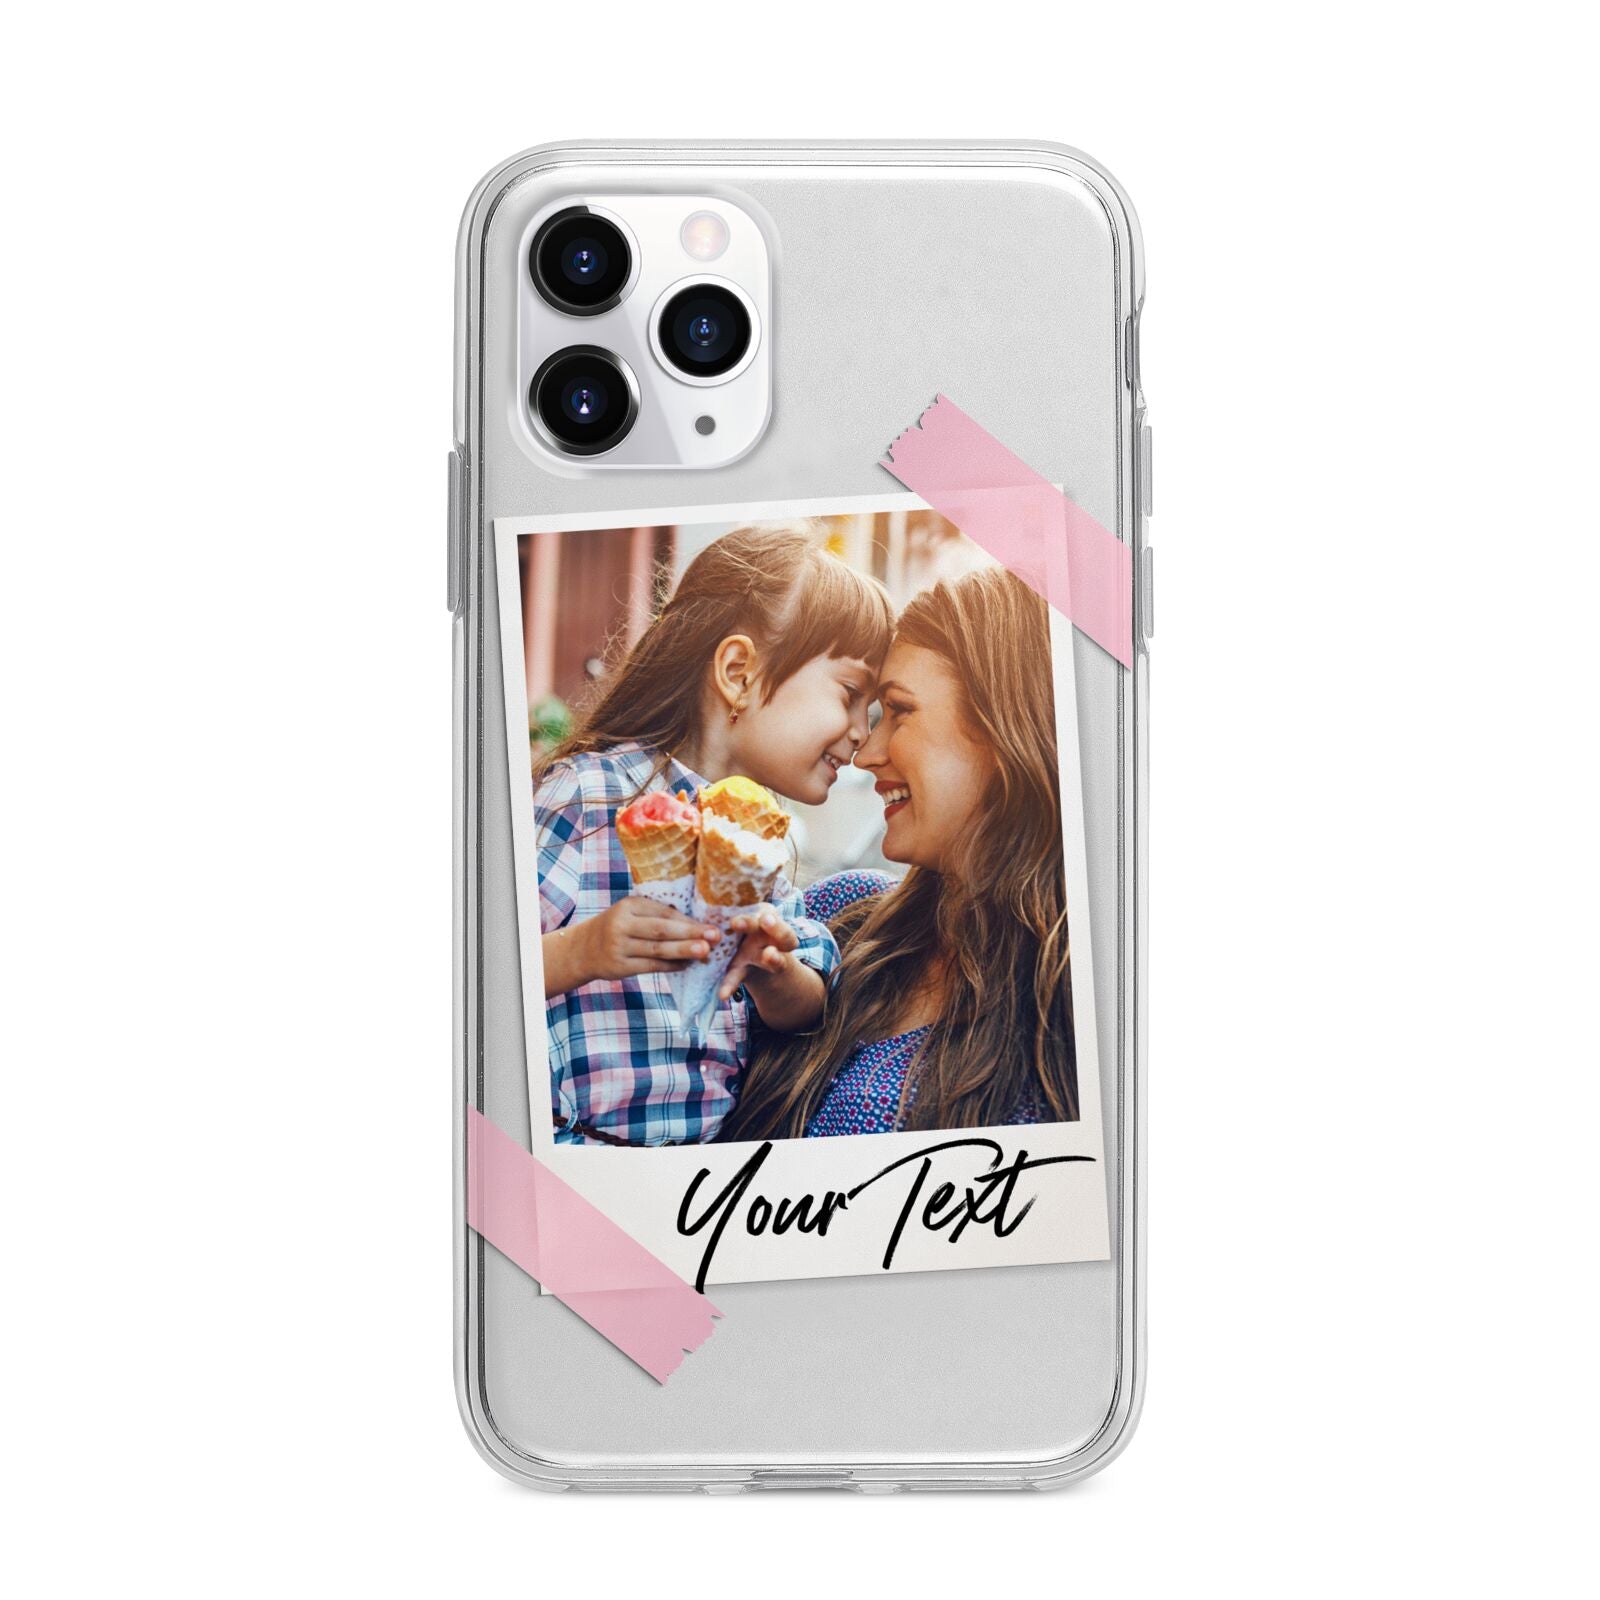 Photo Frame Apple iPhone 11 Pro in Silver with Bumper Case